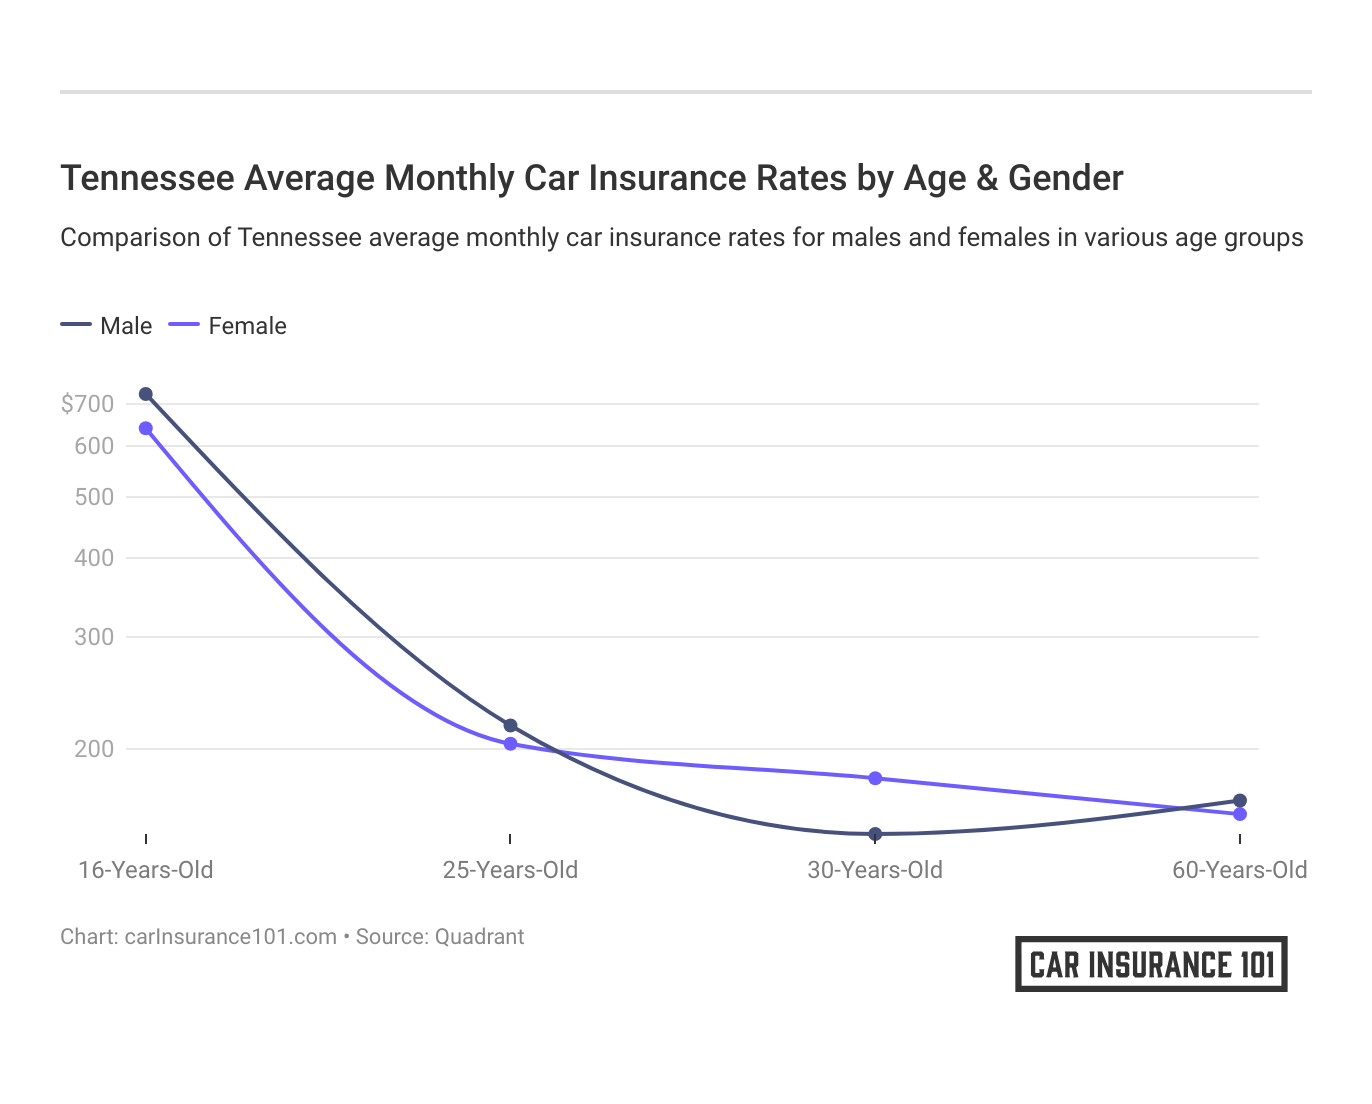 <h3>Tennessee Average Monthly Car Insurance Rates by Age & Gender</h3>